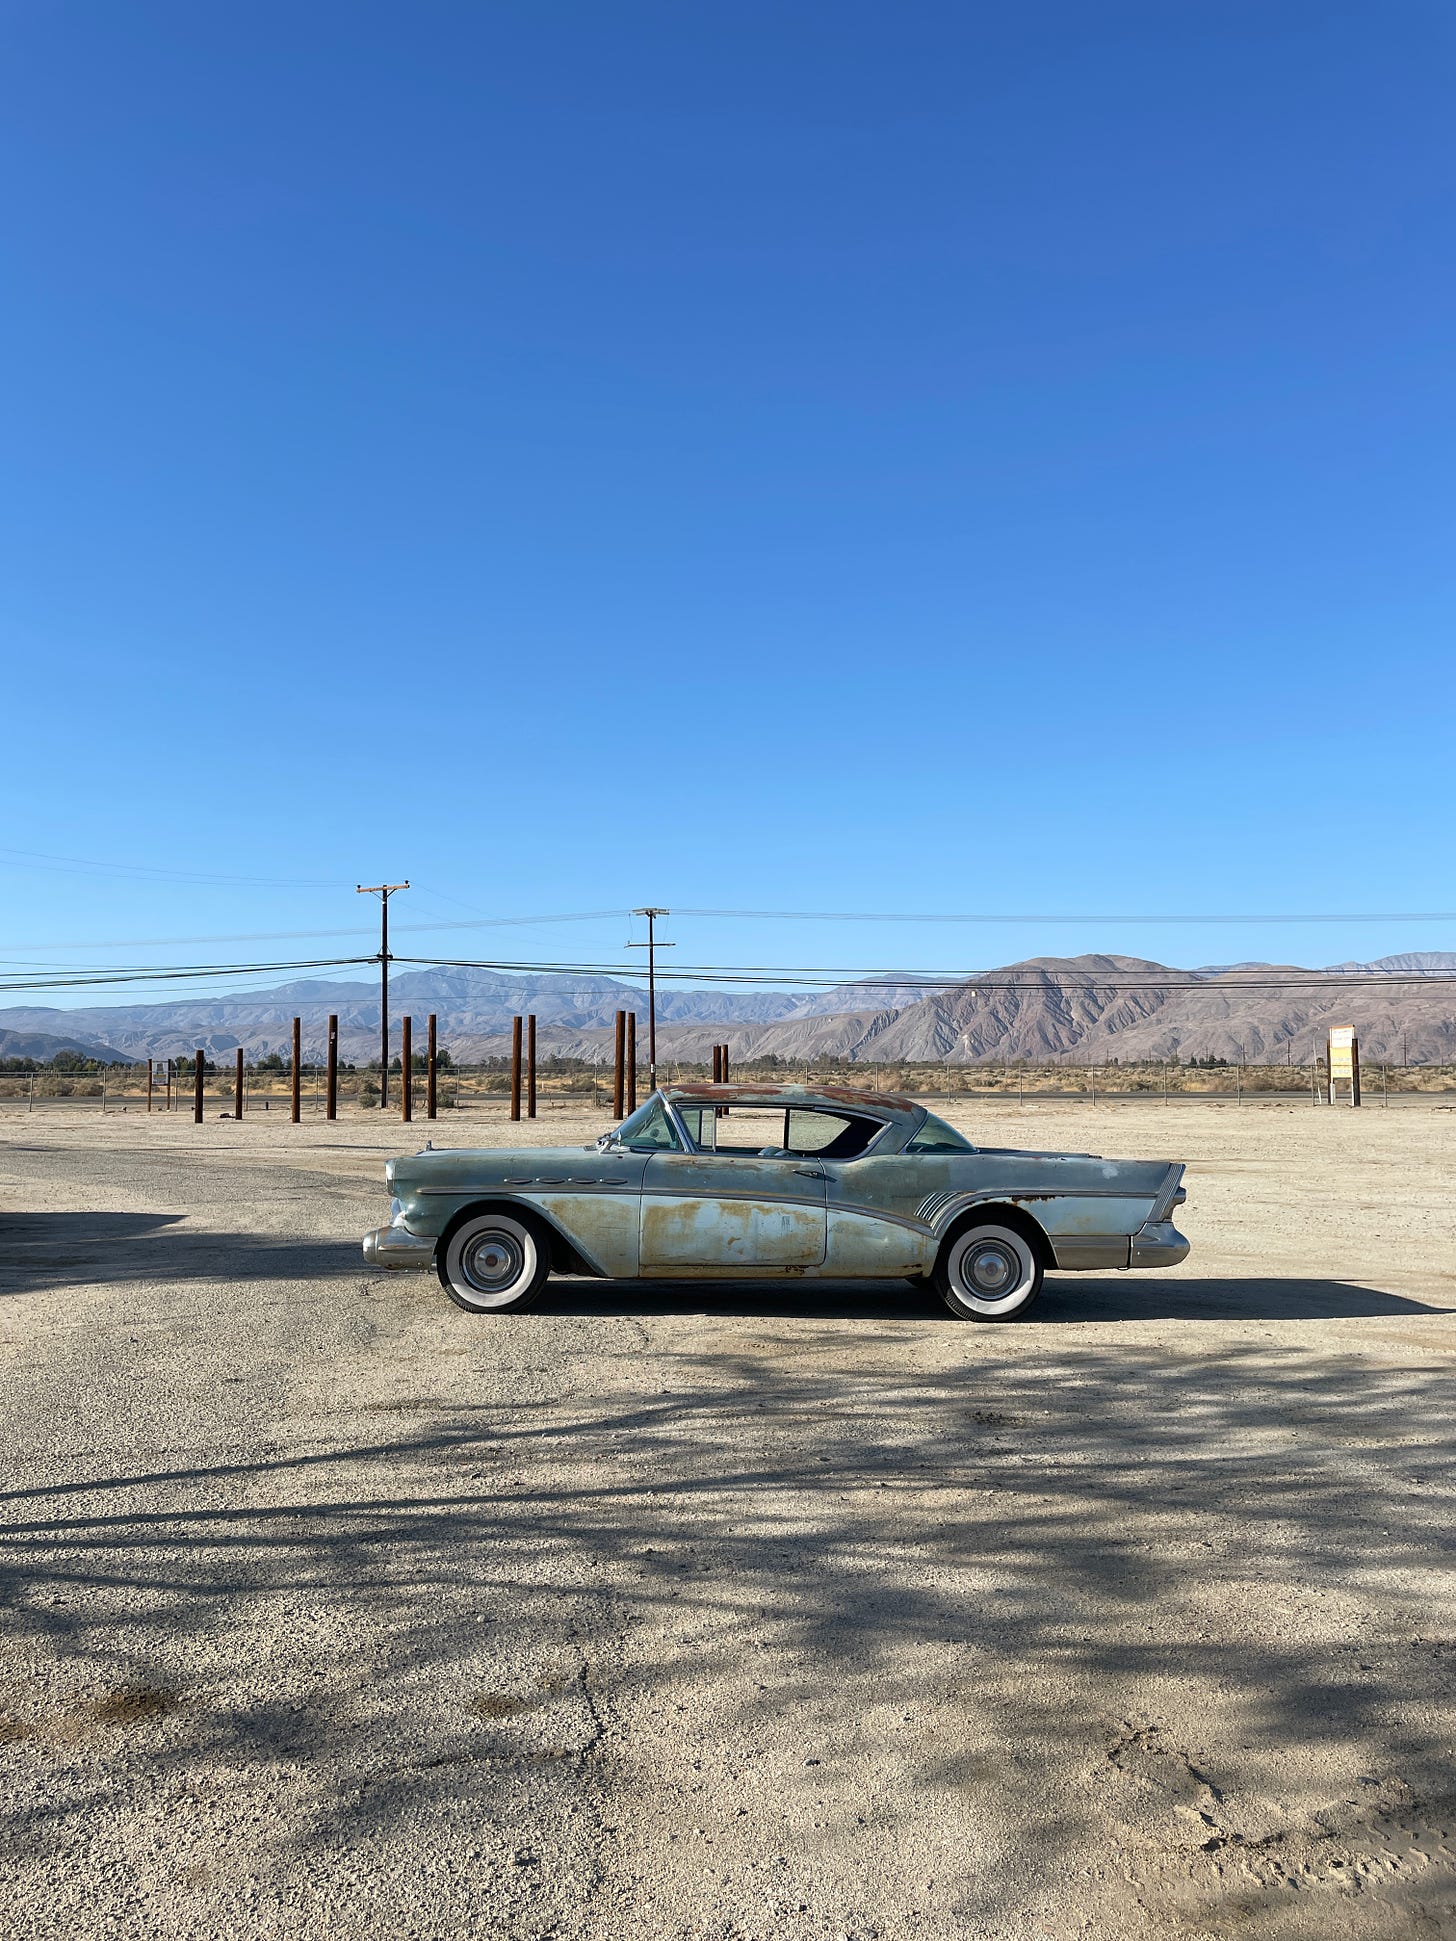 Rusted car in the desert